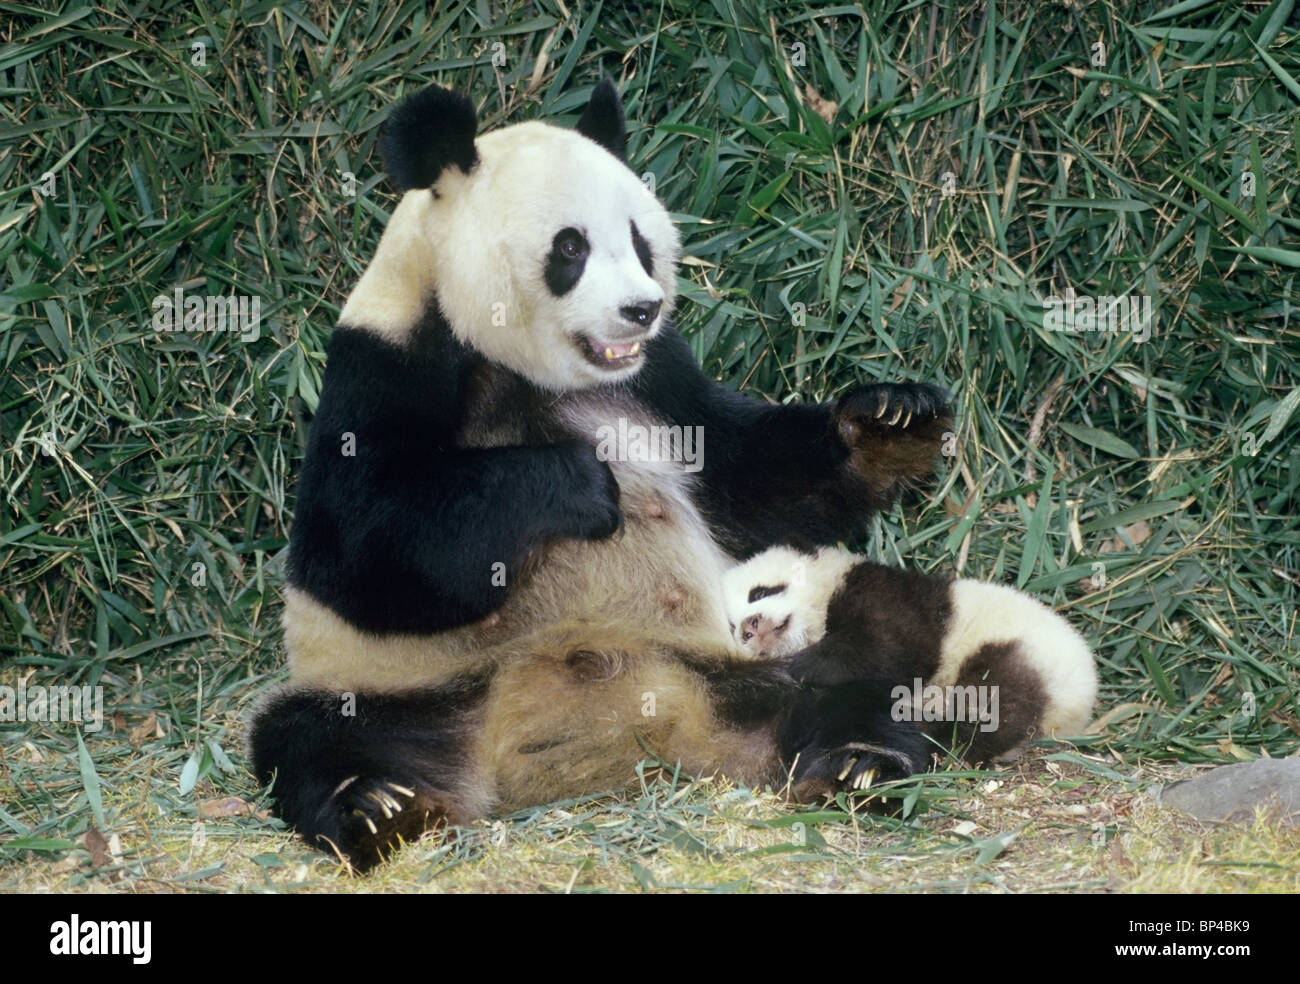 Giant panda mother with 5-month-old baby, Wolong, China Stock Photo